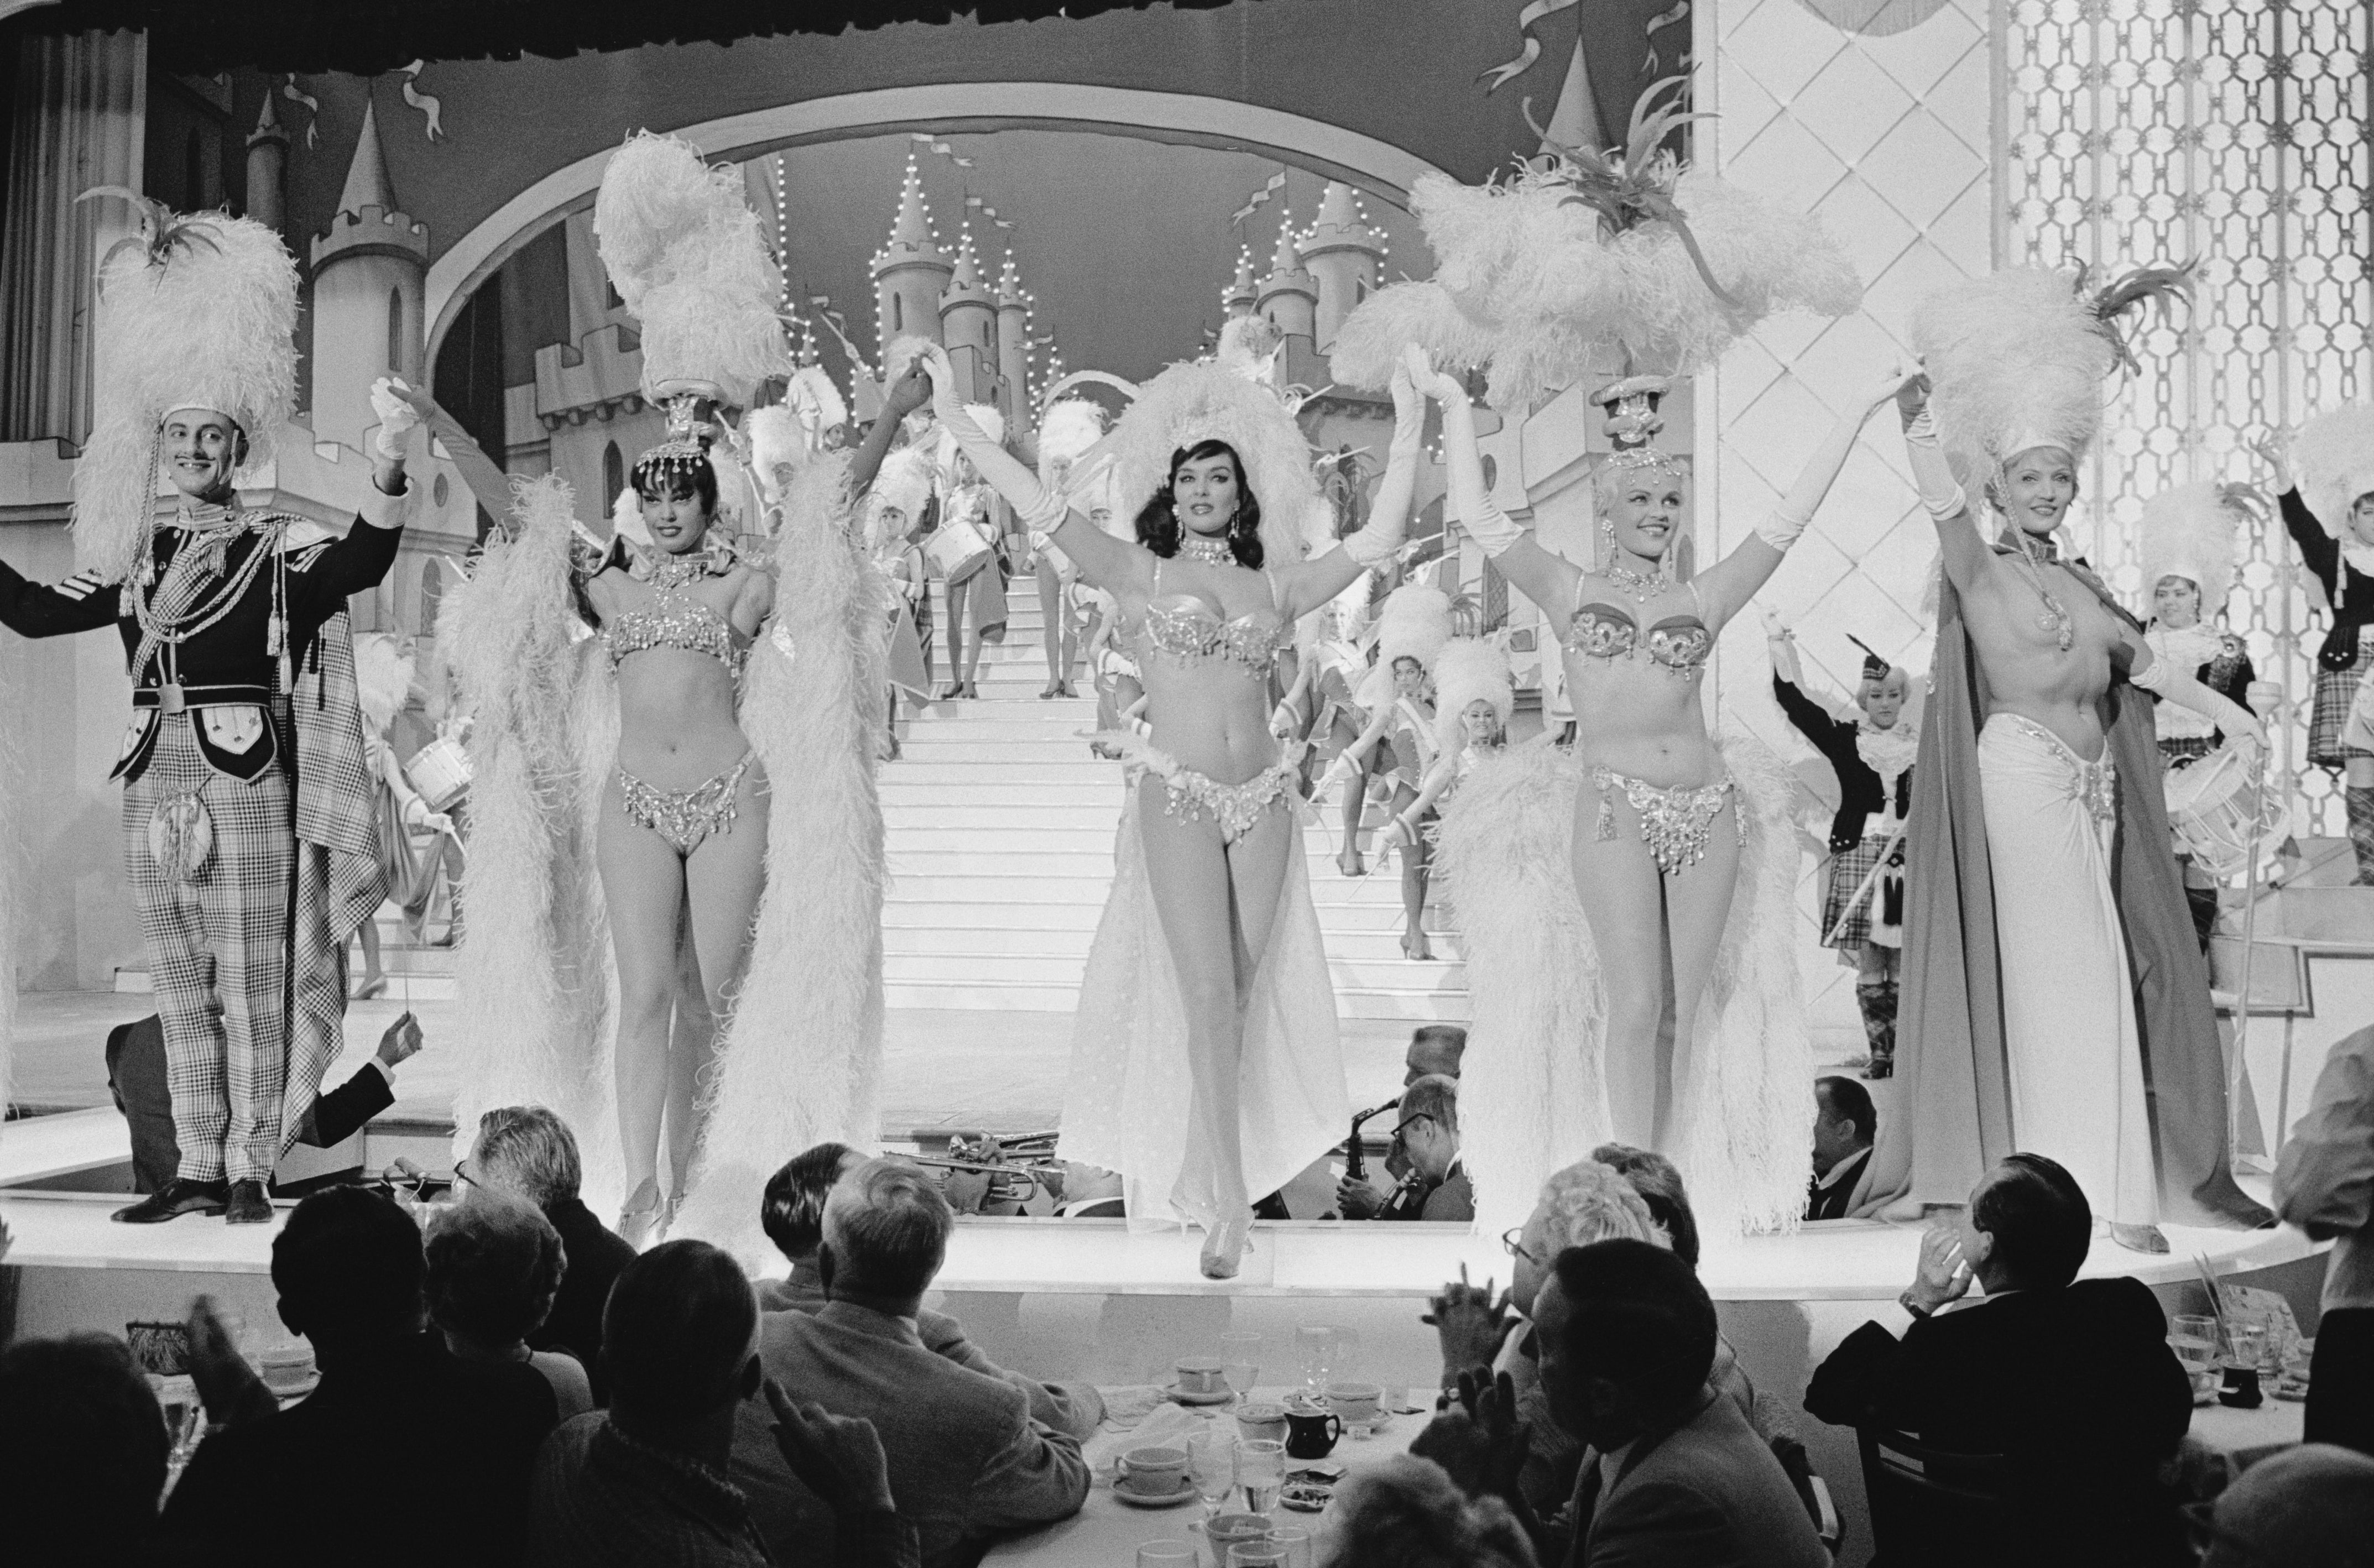 The Tropicana – known as the ‘Trop’ in Vegas shorthand – debuted its Paris-tinged topless showgirls production Folies Bergere in 1959, forever enshrining the image of the feathered, bedazzled dancers in Sin City legend